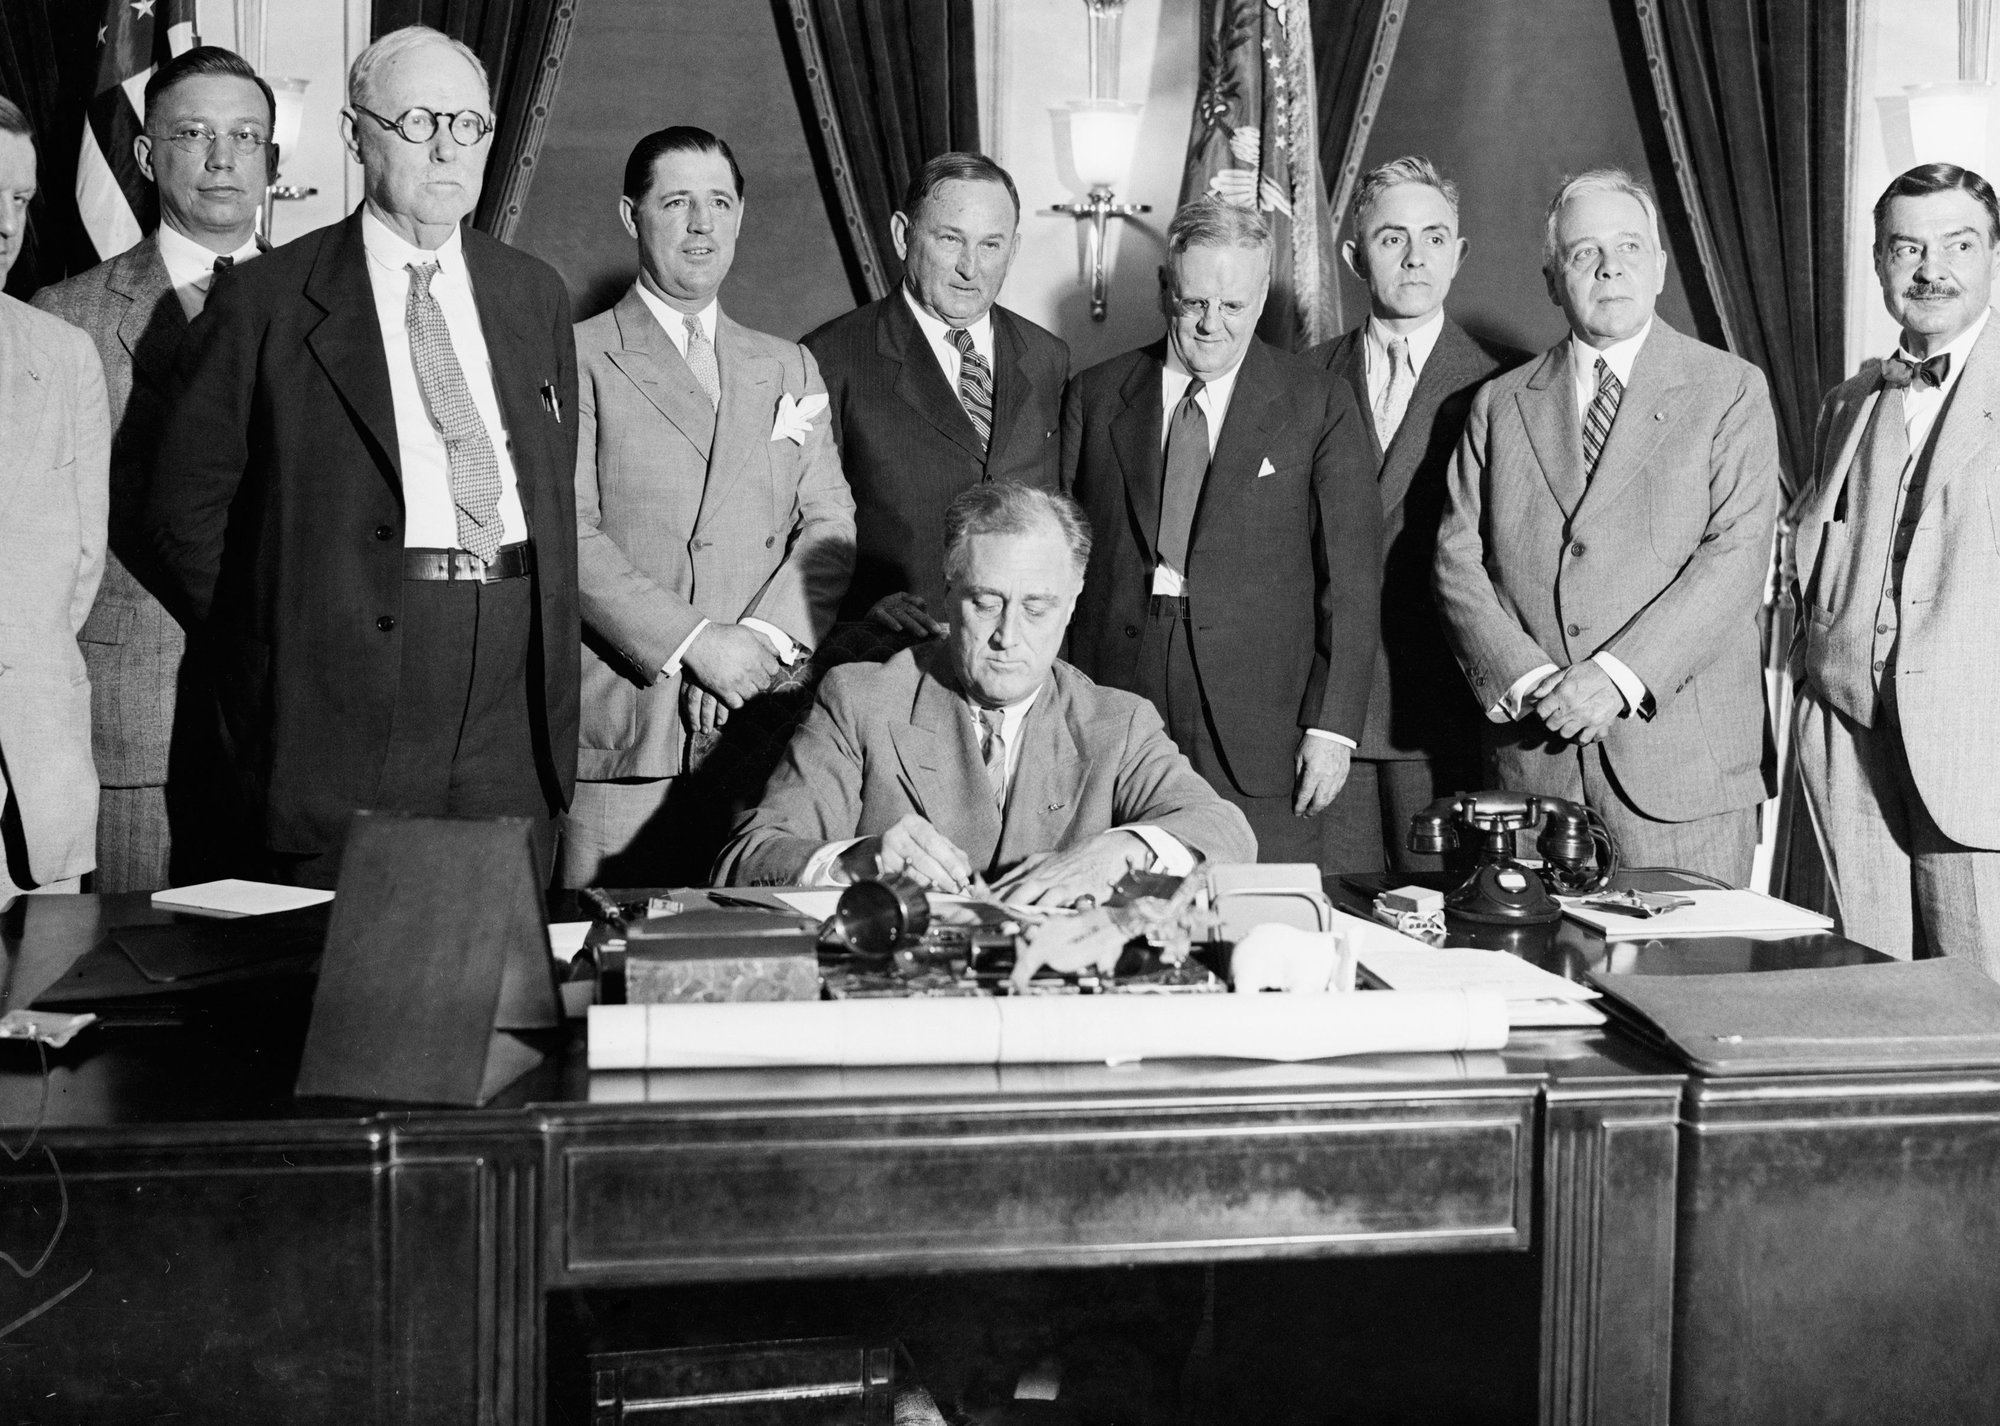 Photograph of President Franklin D. Roosevelt signing legislation related to the New Deal - Bettmann // Getty Images